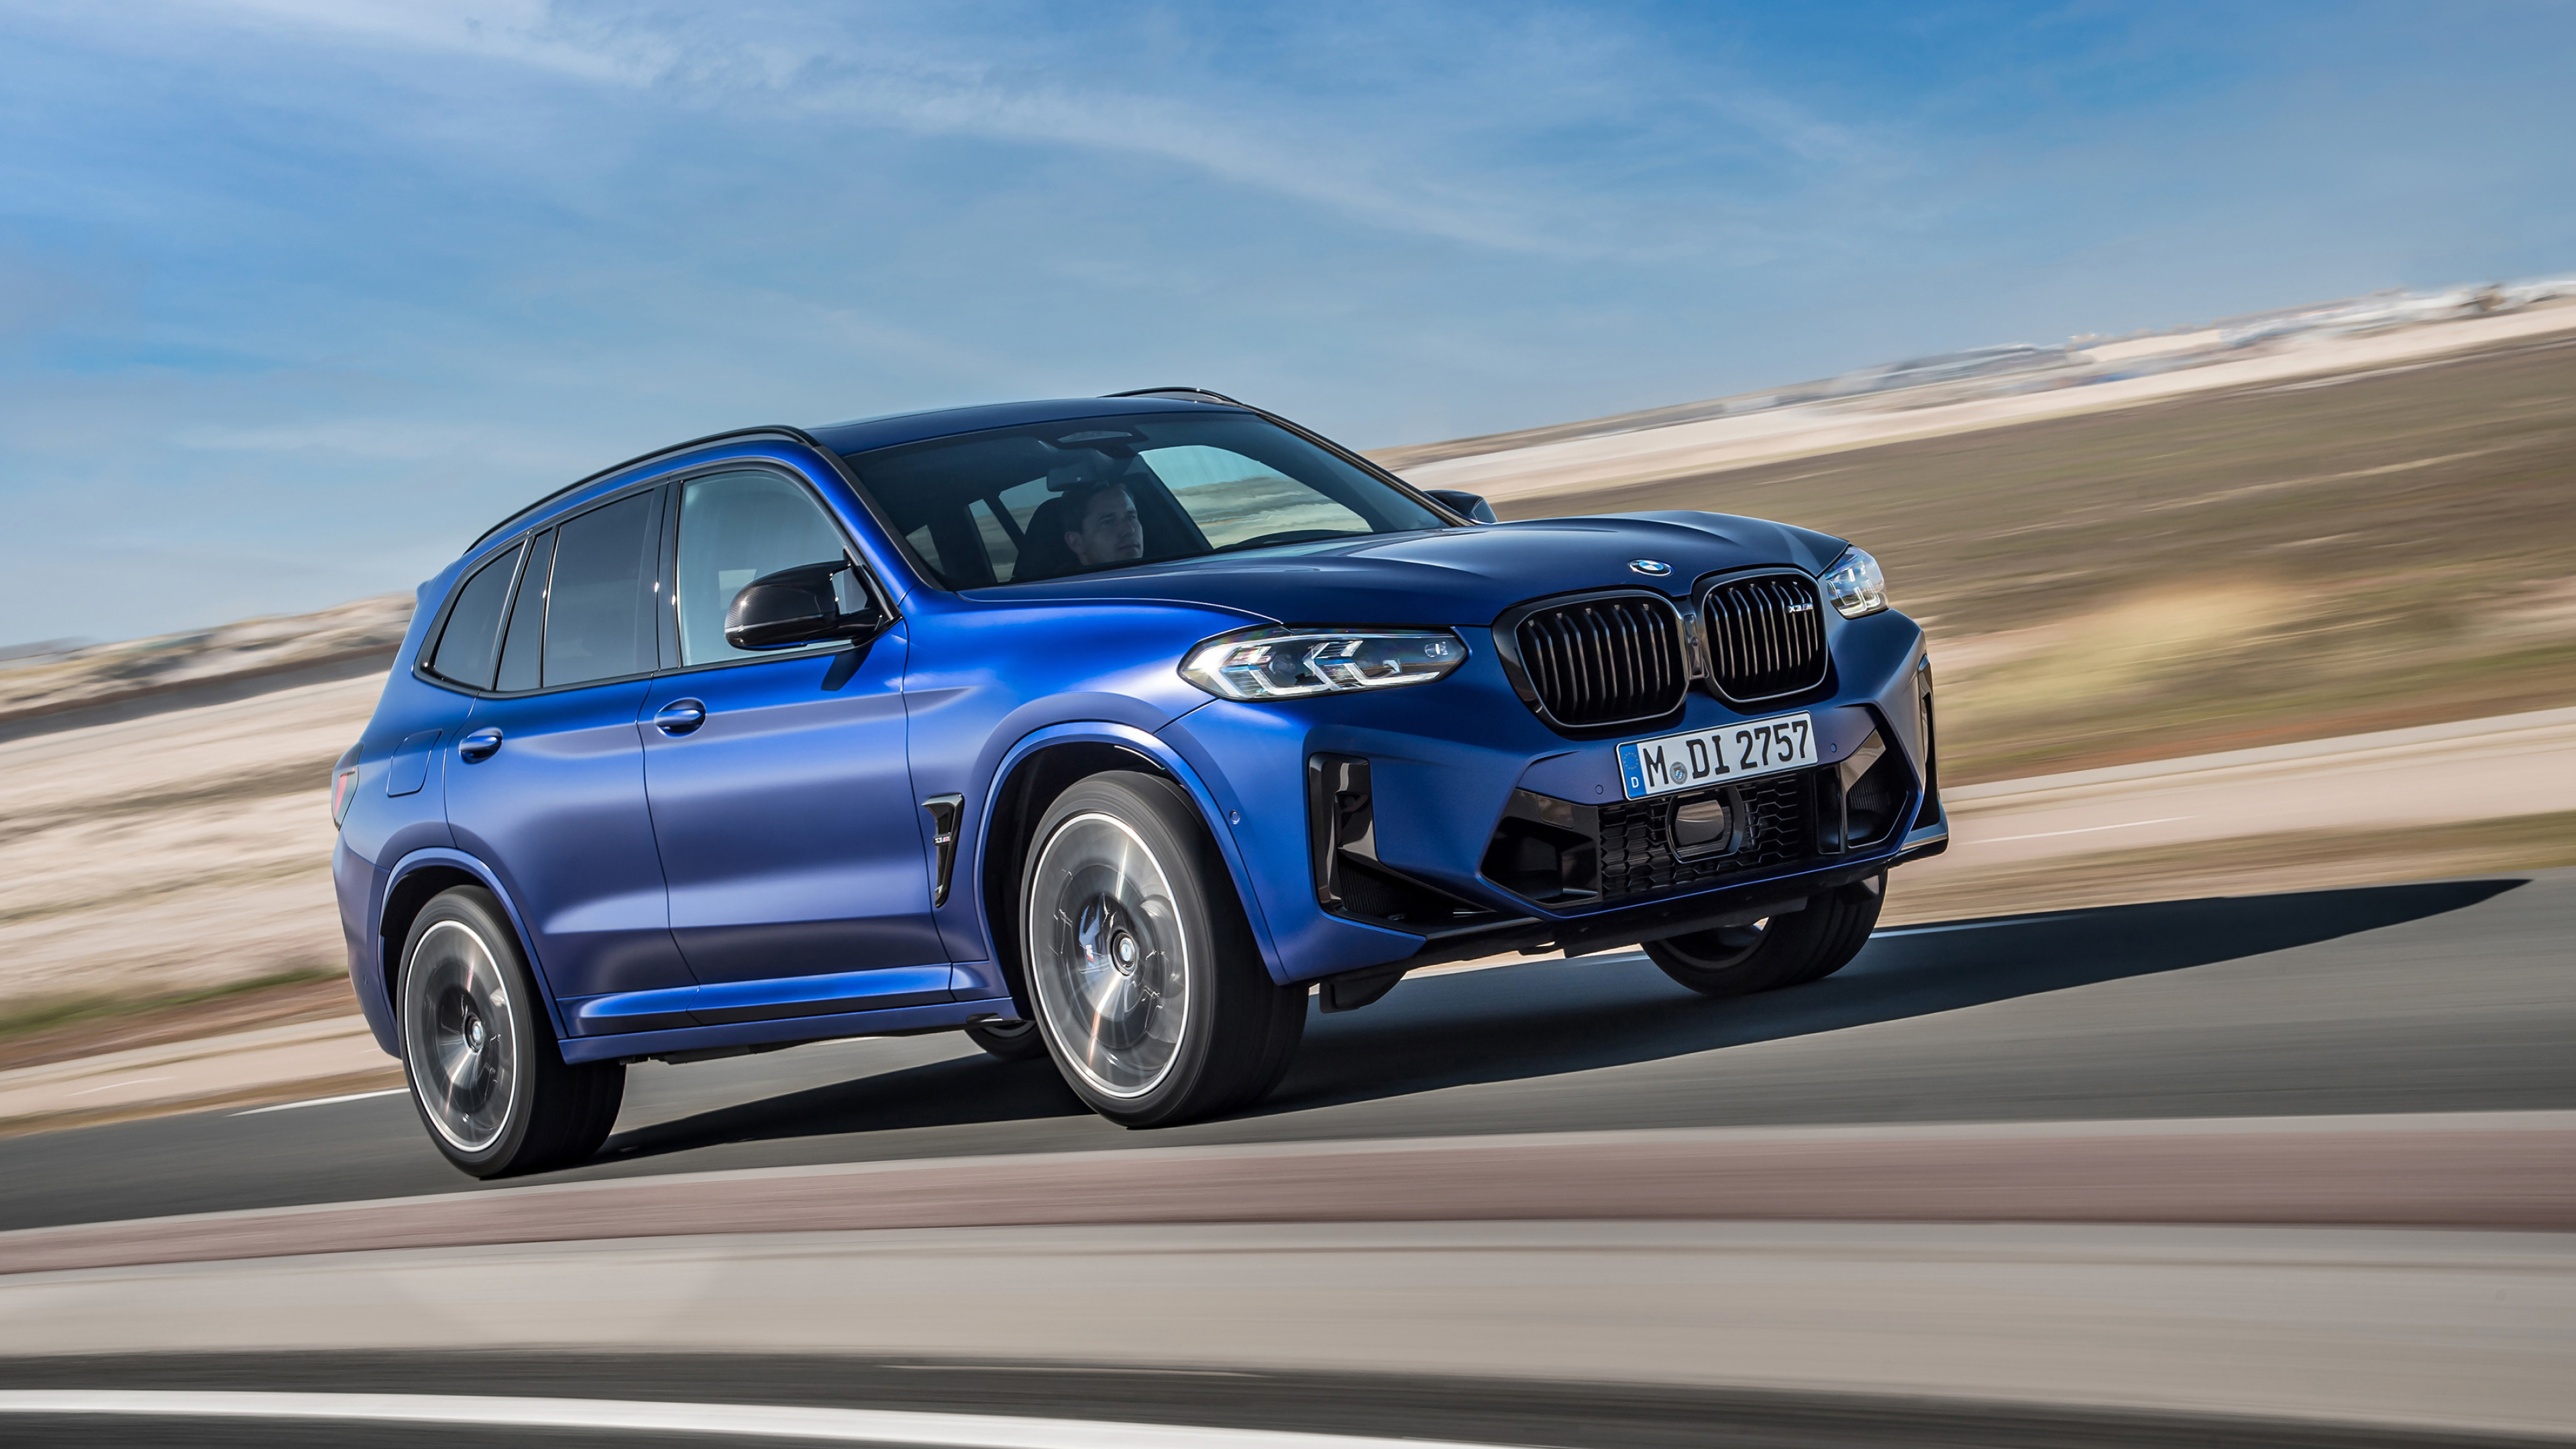 BMW X3, M competition edition, Luxury and performance, Cutting-edge features, 3840x2160 4K Desktop